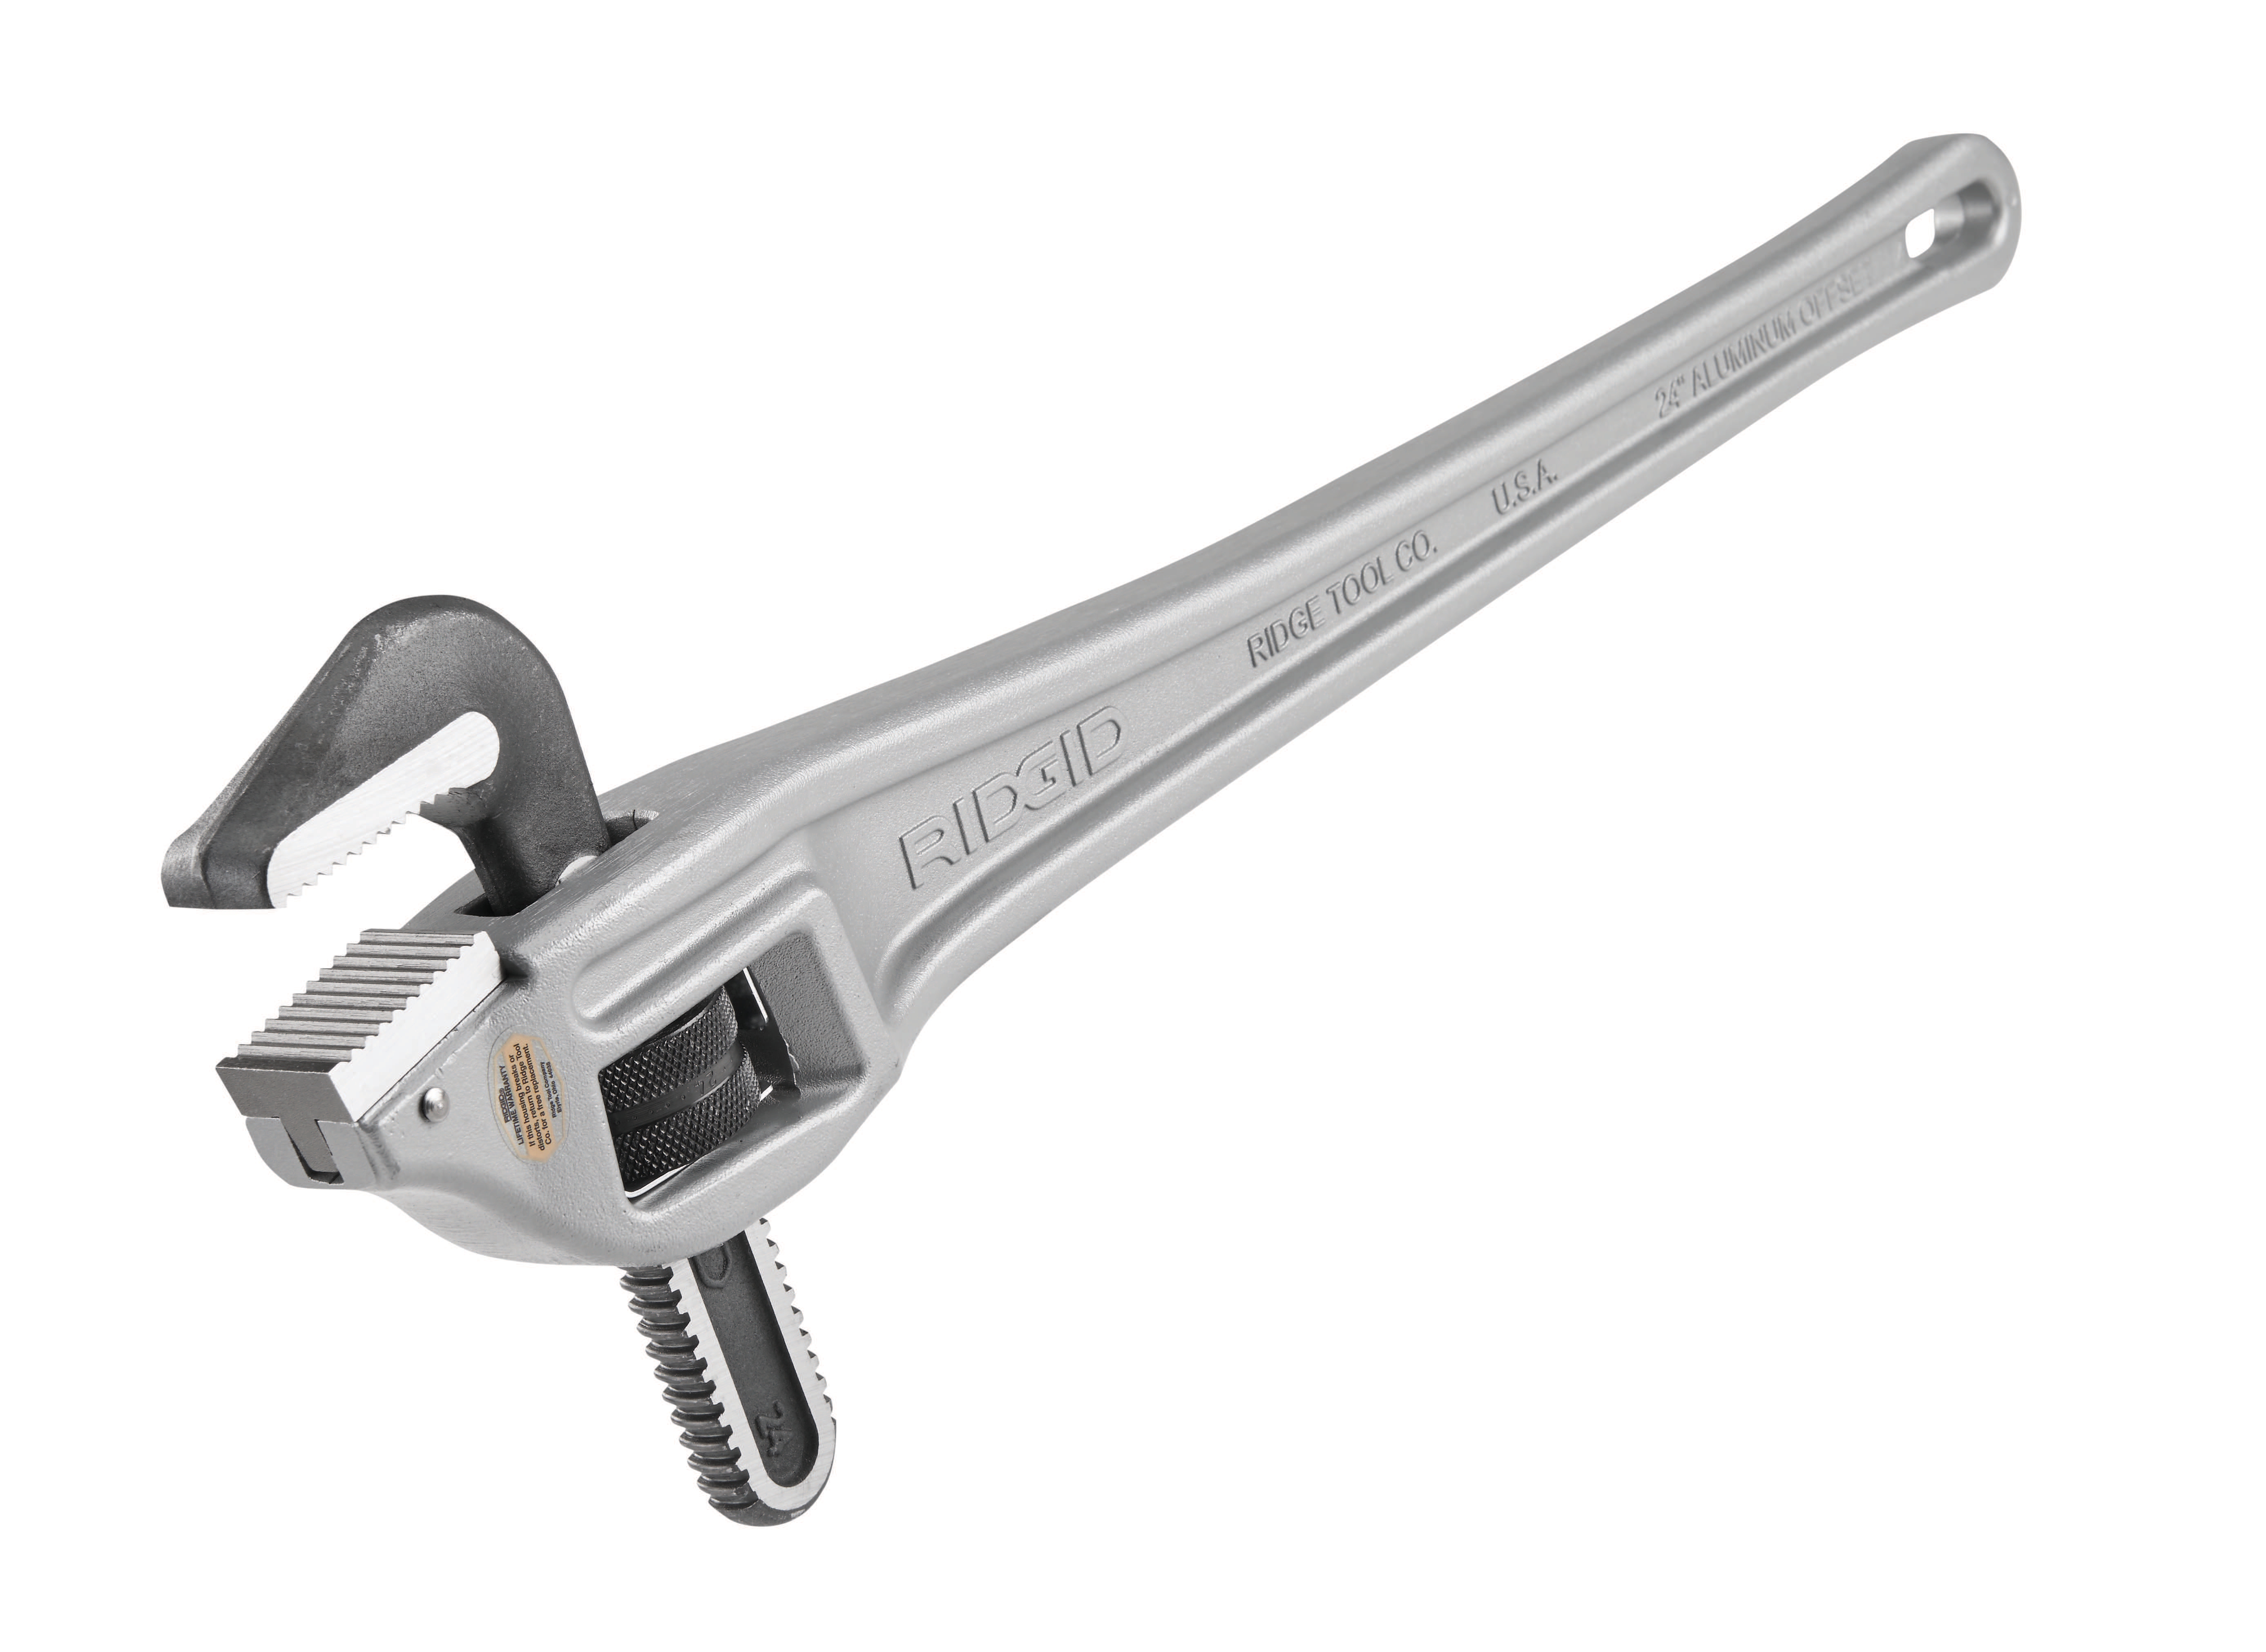 31130 24-in Aluminum Offset Pipe Wrench